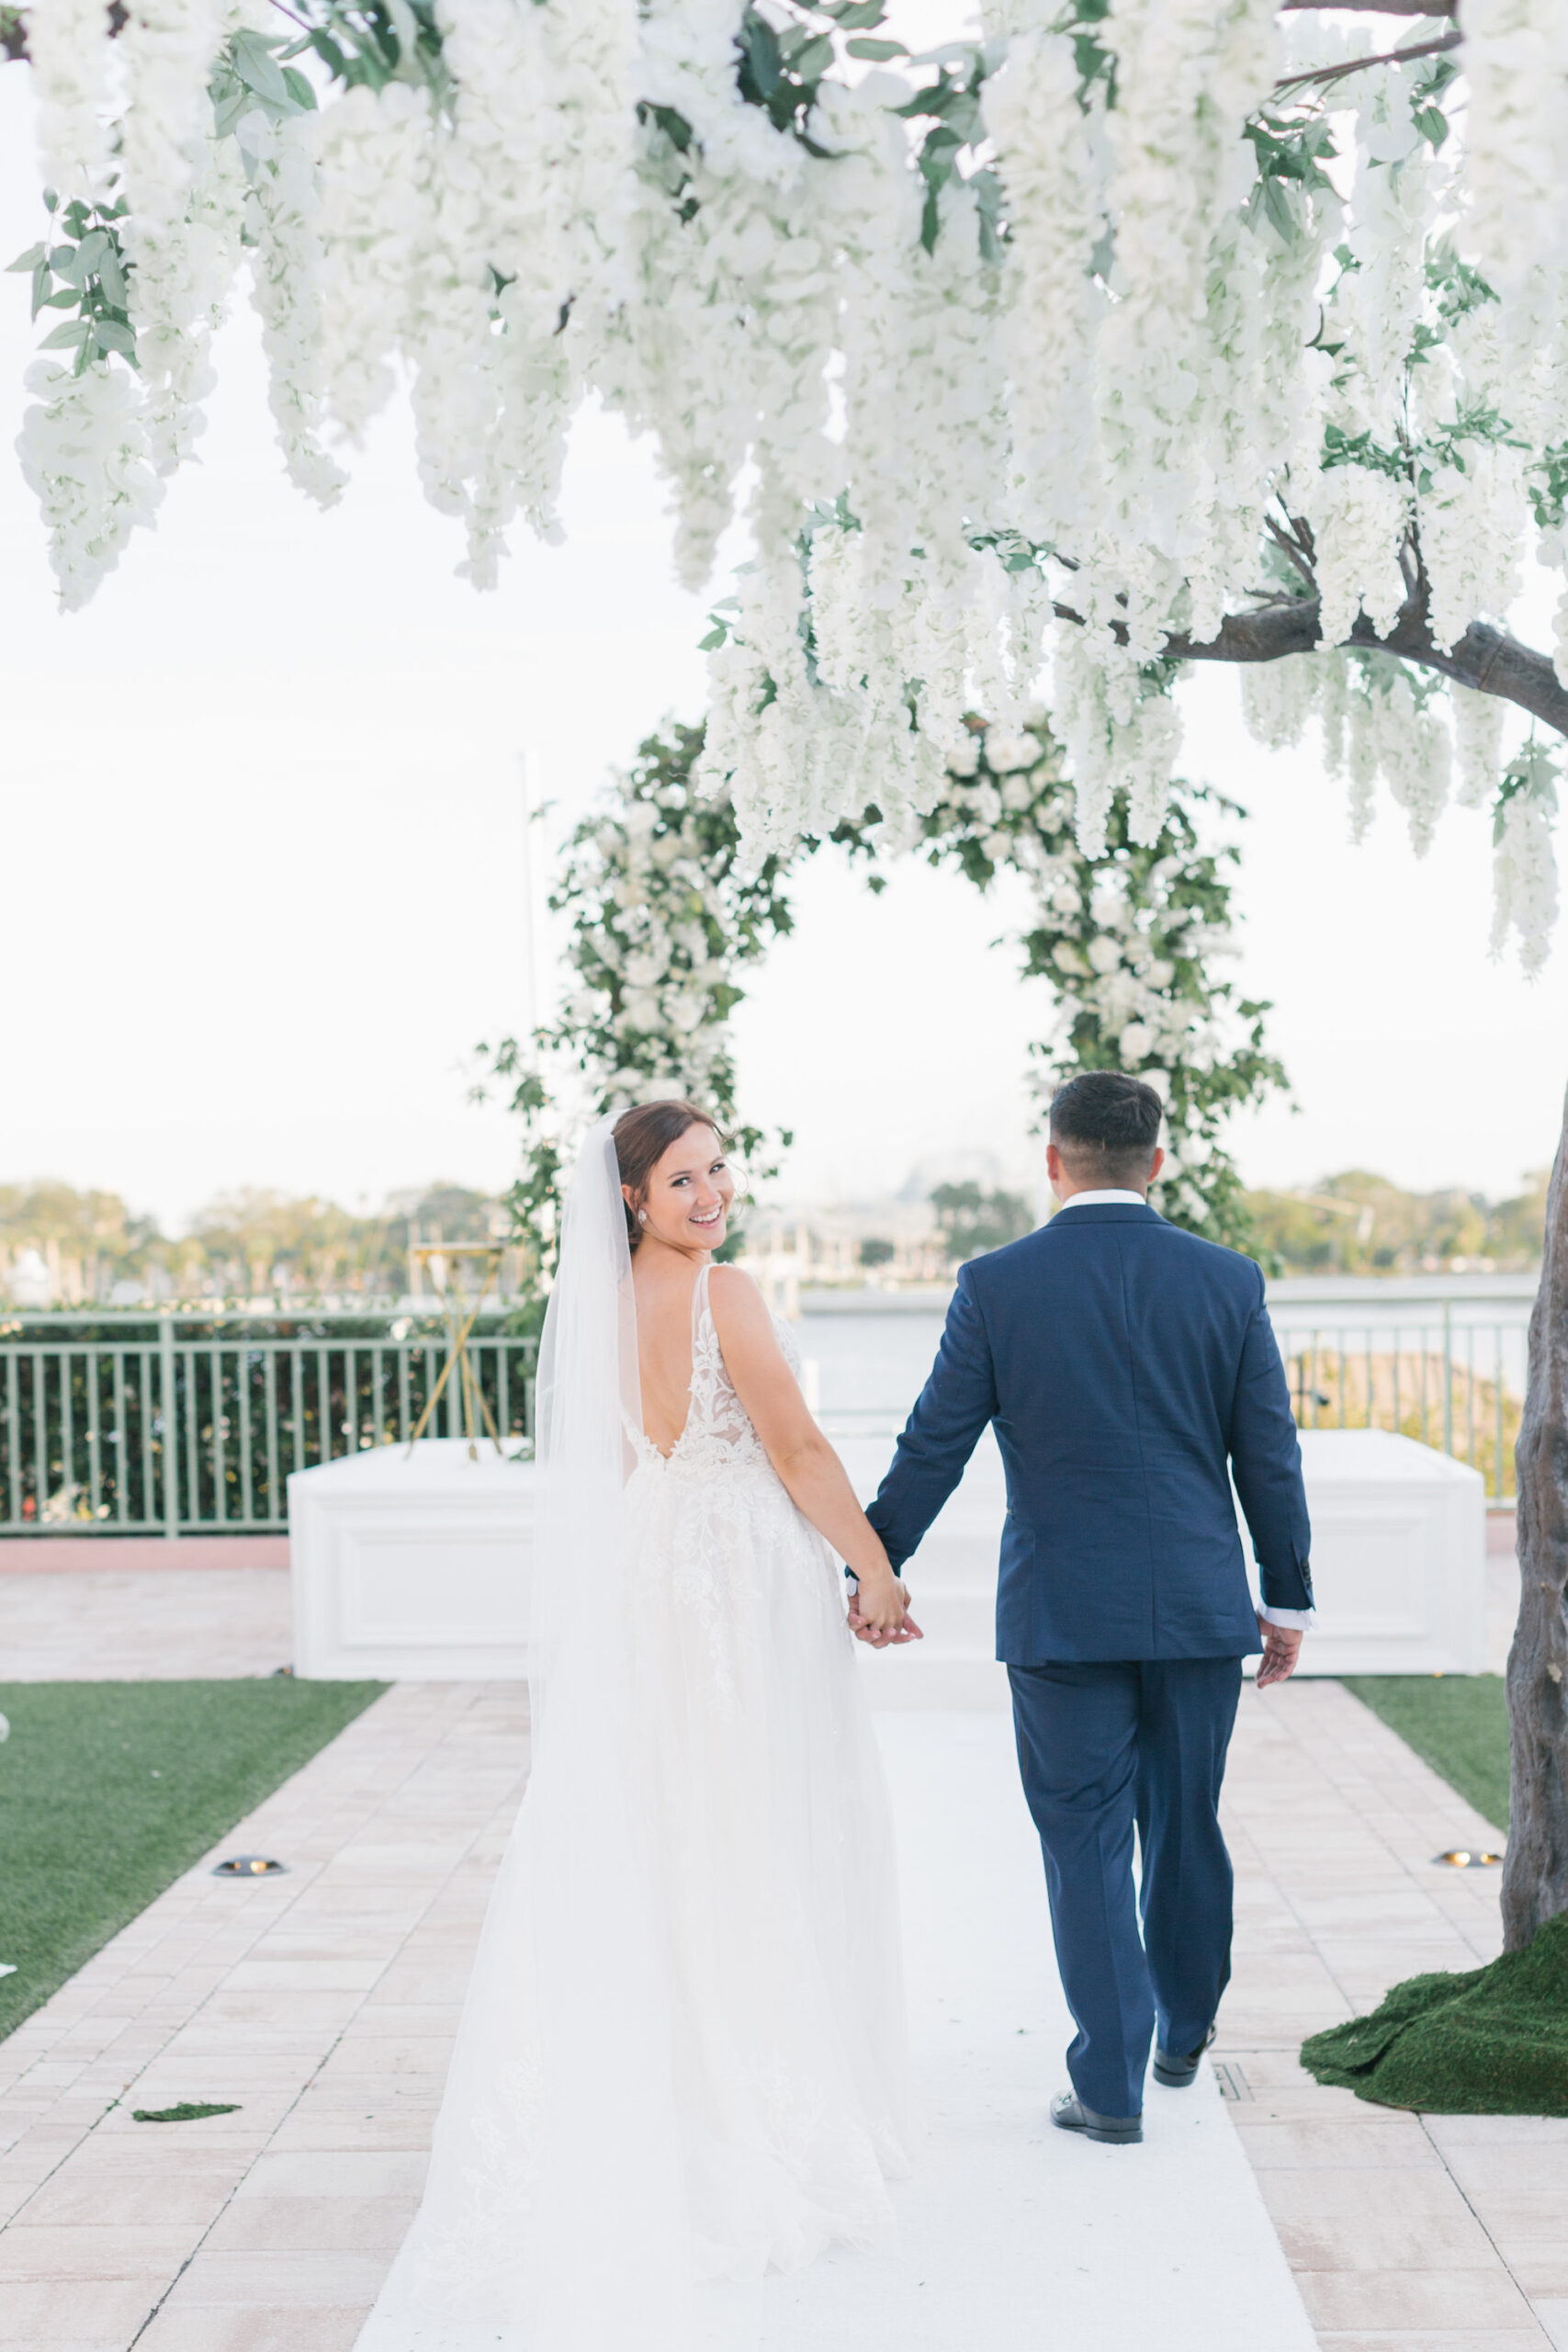 Tall Wisteria Tree Wedding Ceremony Aisle Decor | Whimsical White and Greenery Garden Floral Wedding Arch with White Aisle Runner